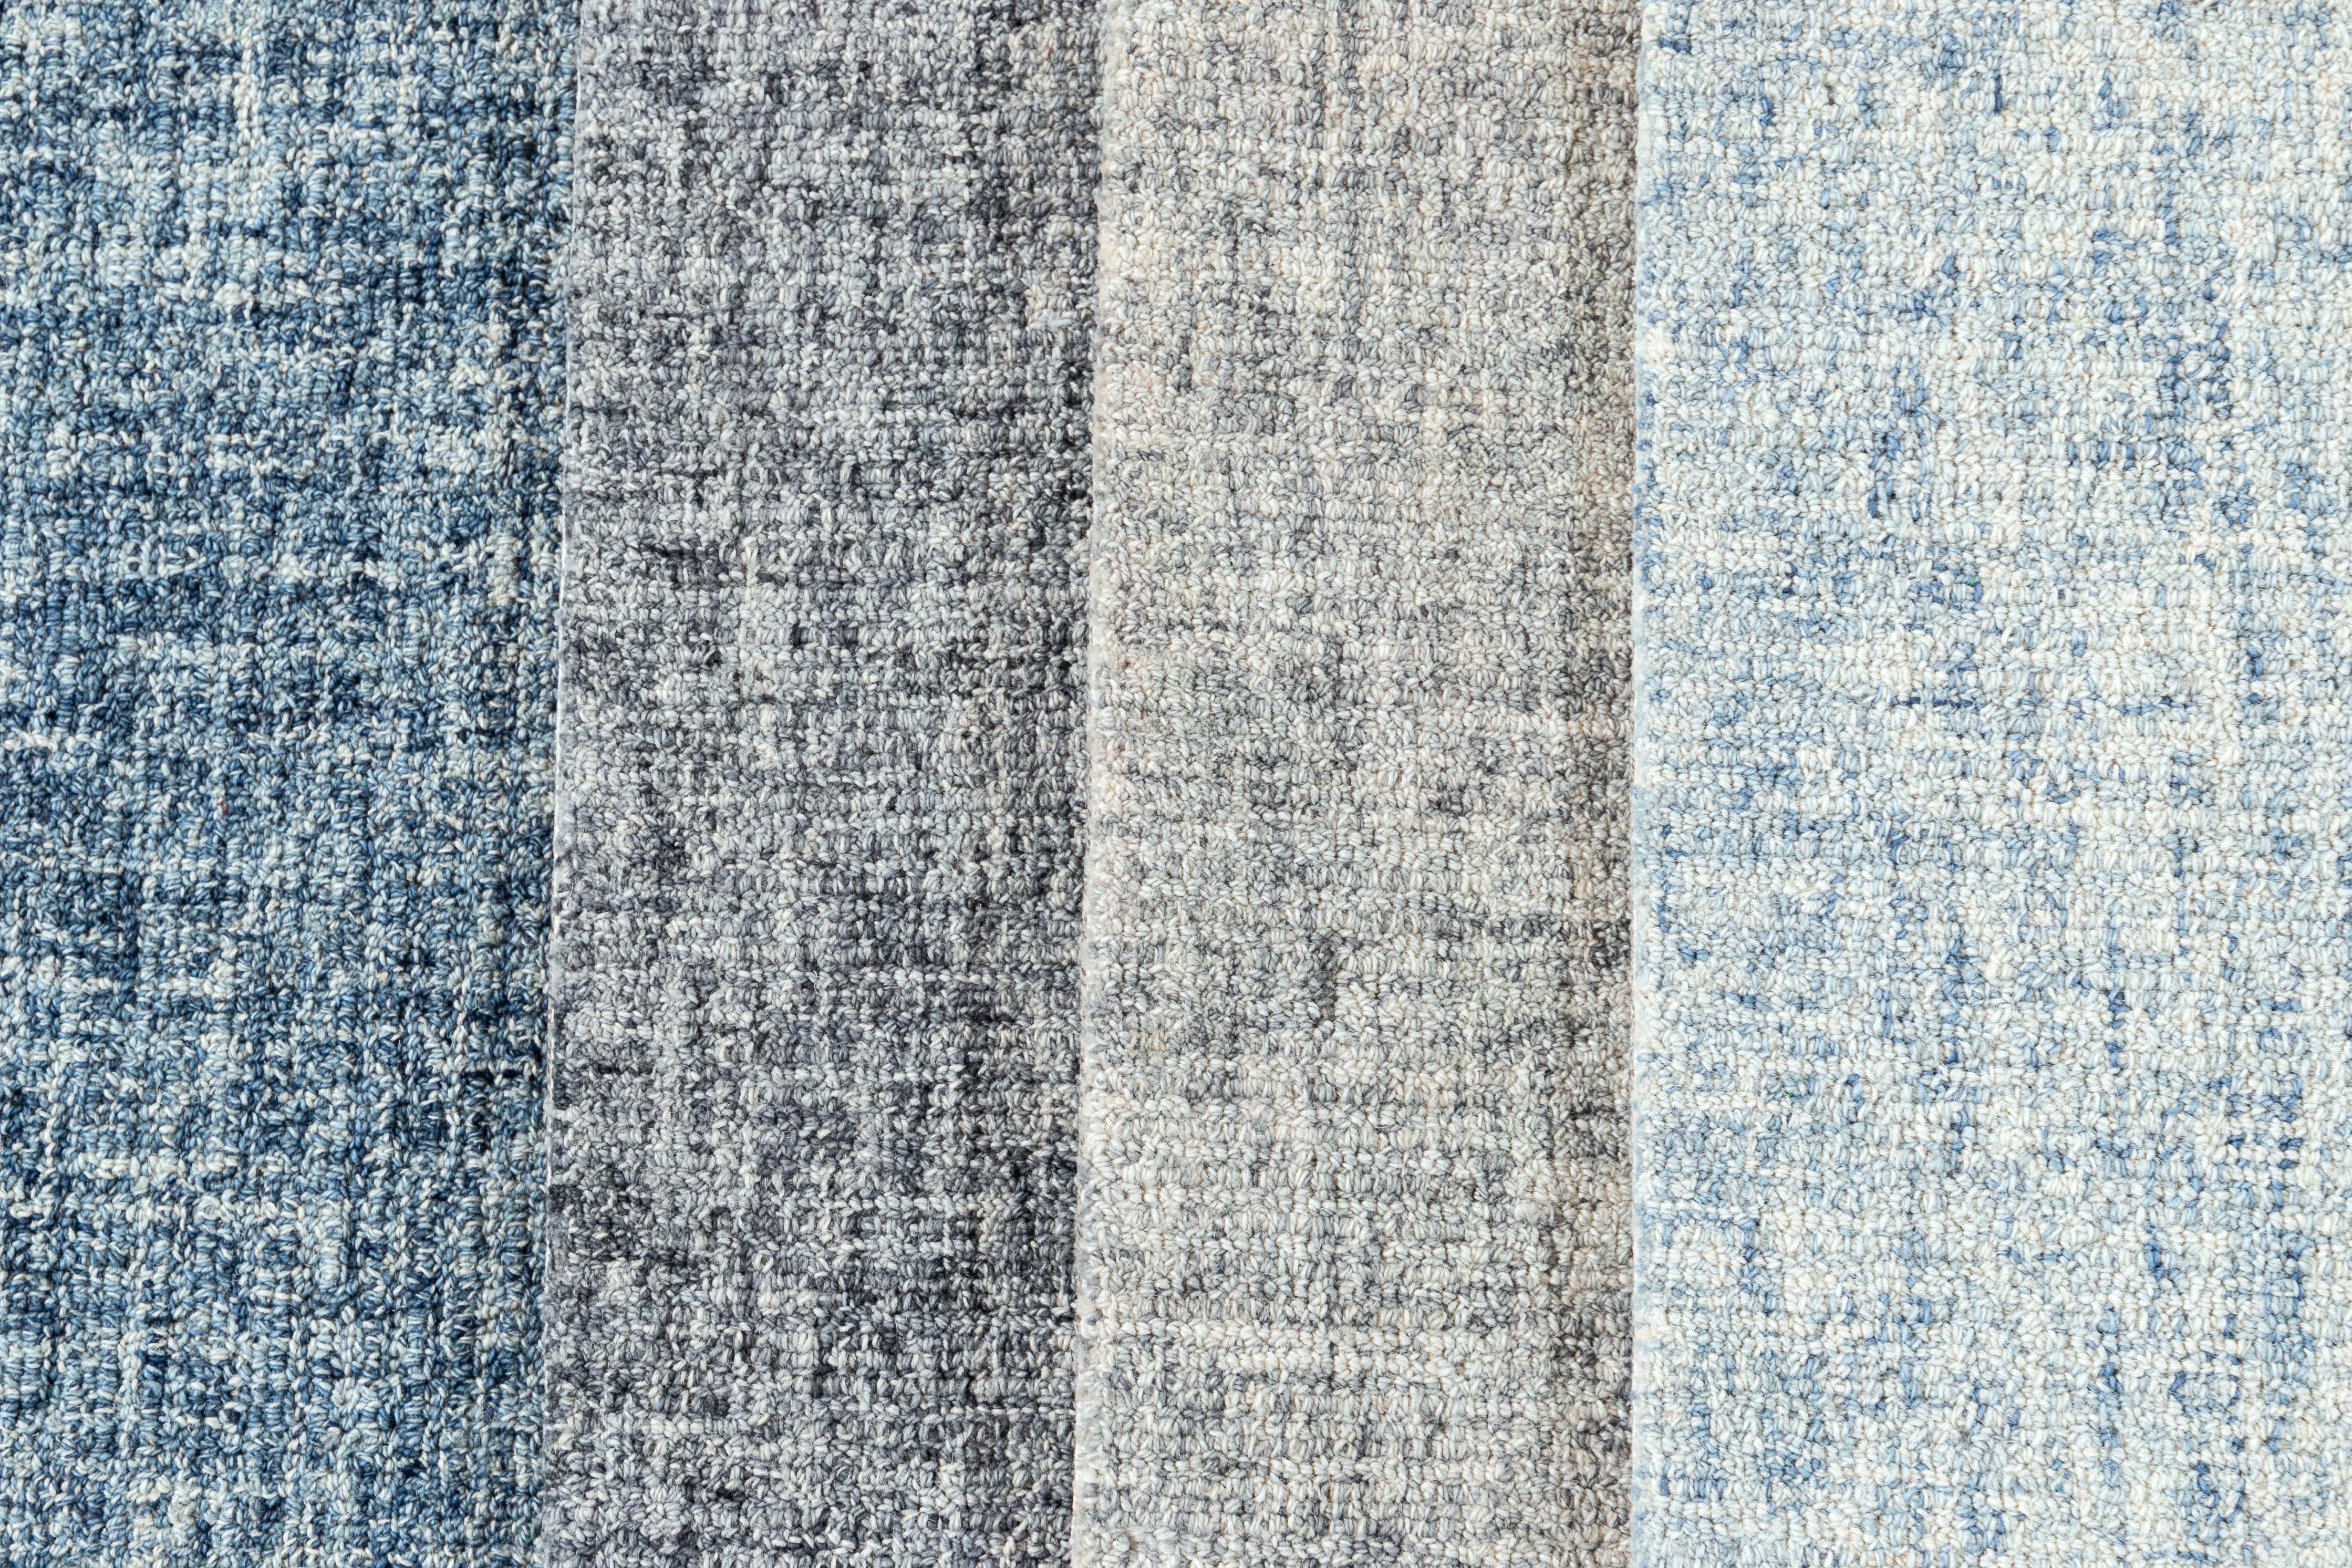 Tufted wool custom rug. Custom sizes and colors made-to-order.

Material: Tufted wool
Lead time: Approximate 12 weeks
Available colors: 20+ shades and styles
Made in India.

(Note: Pricing listed is for an 8' x 10' rug.)
 